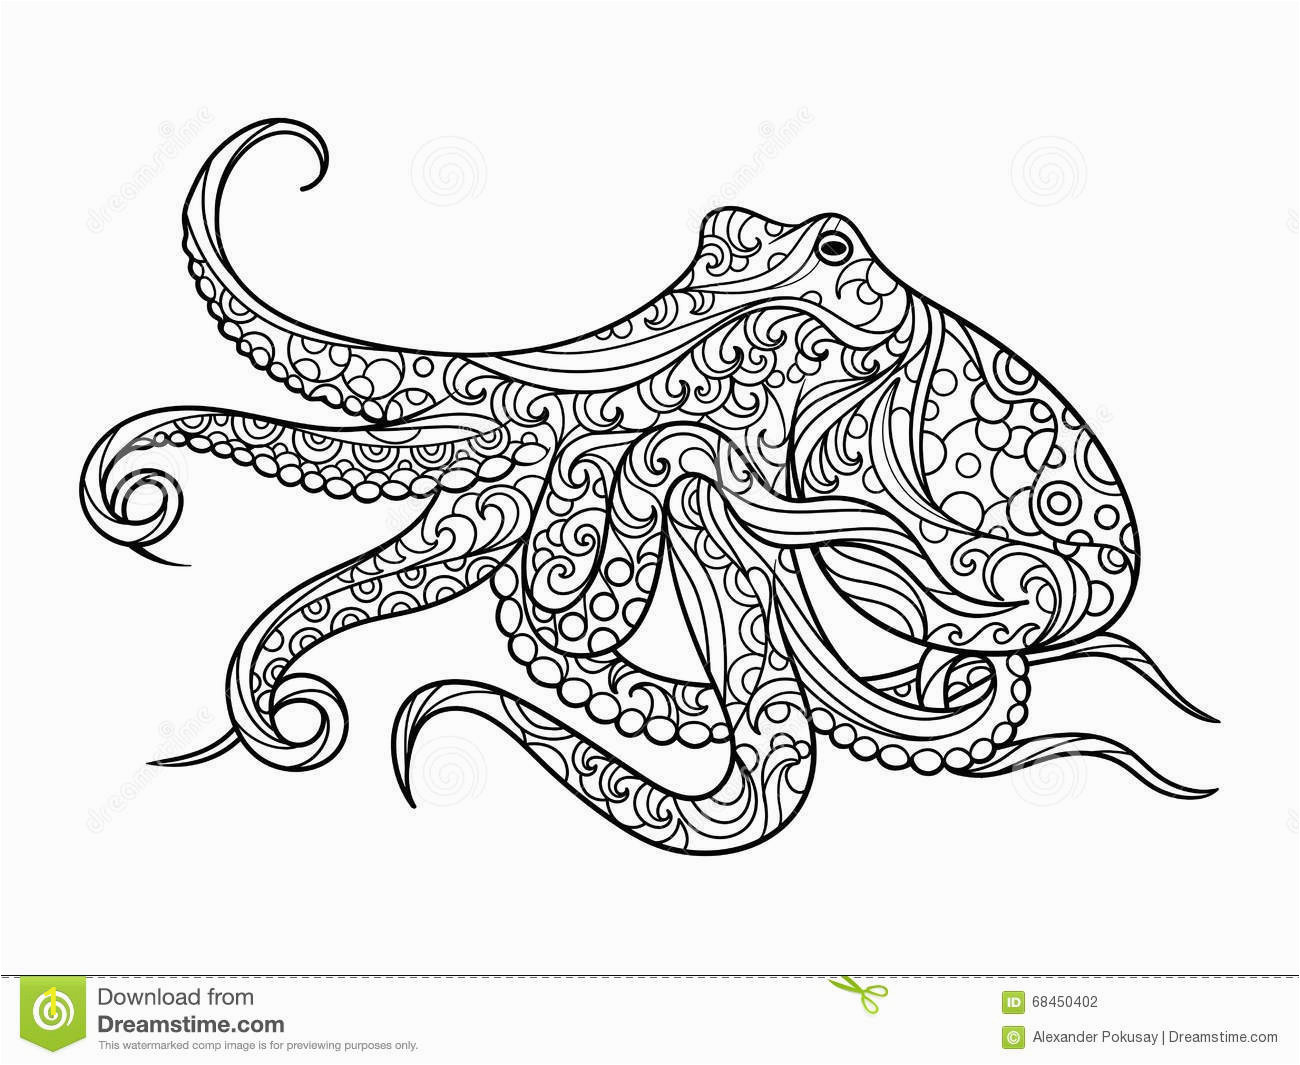 octopus coloring book adults vector sea animal illustration anti stress adult zentangle style black white